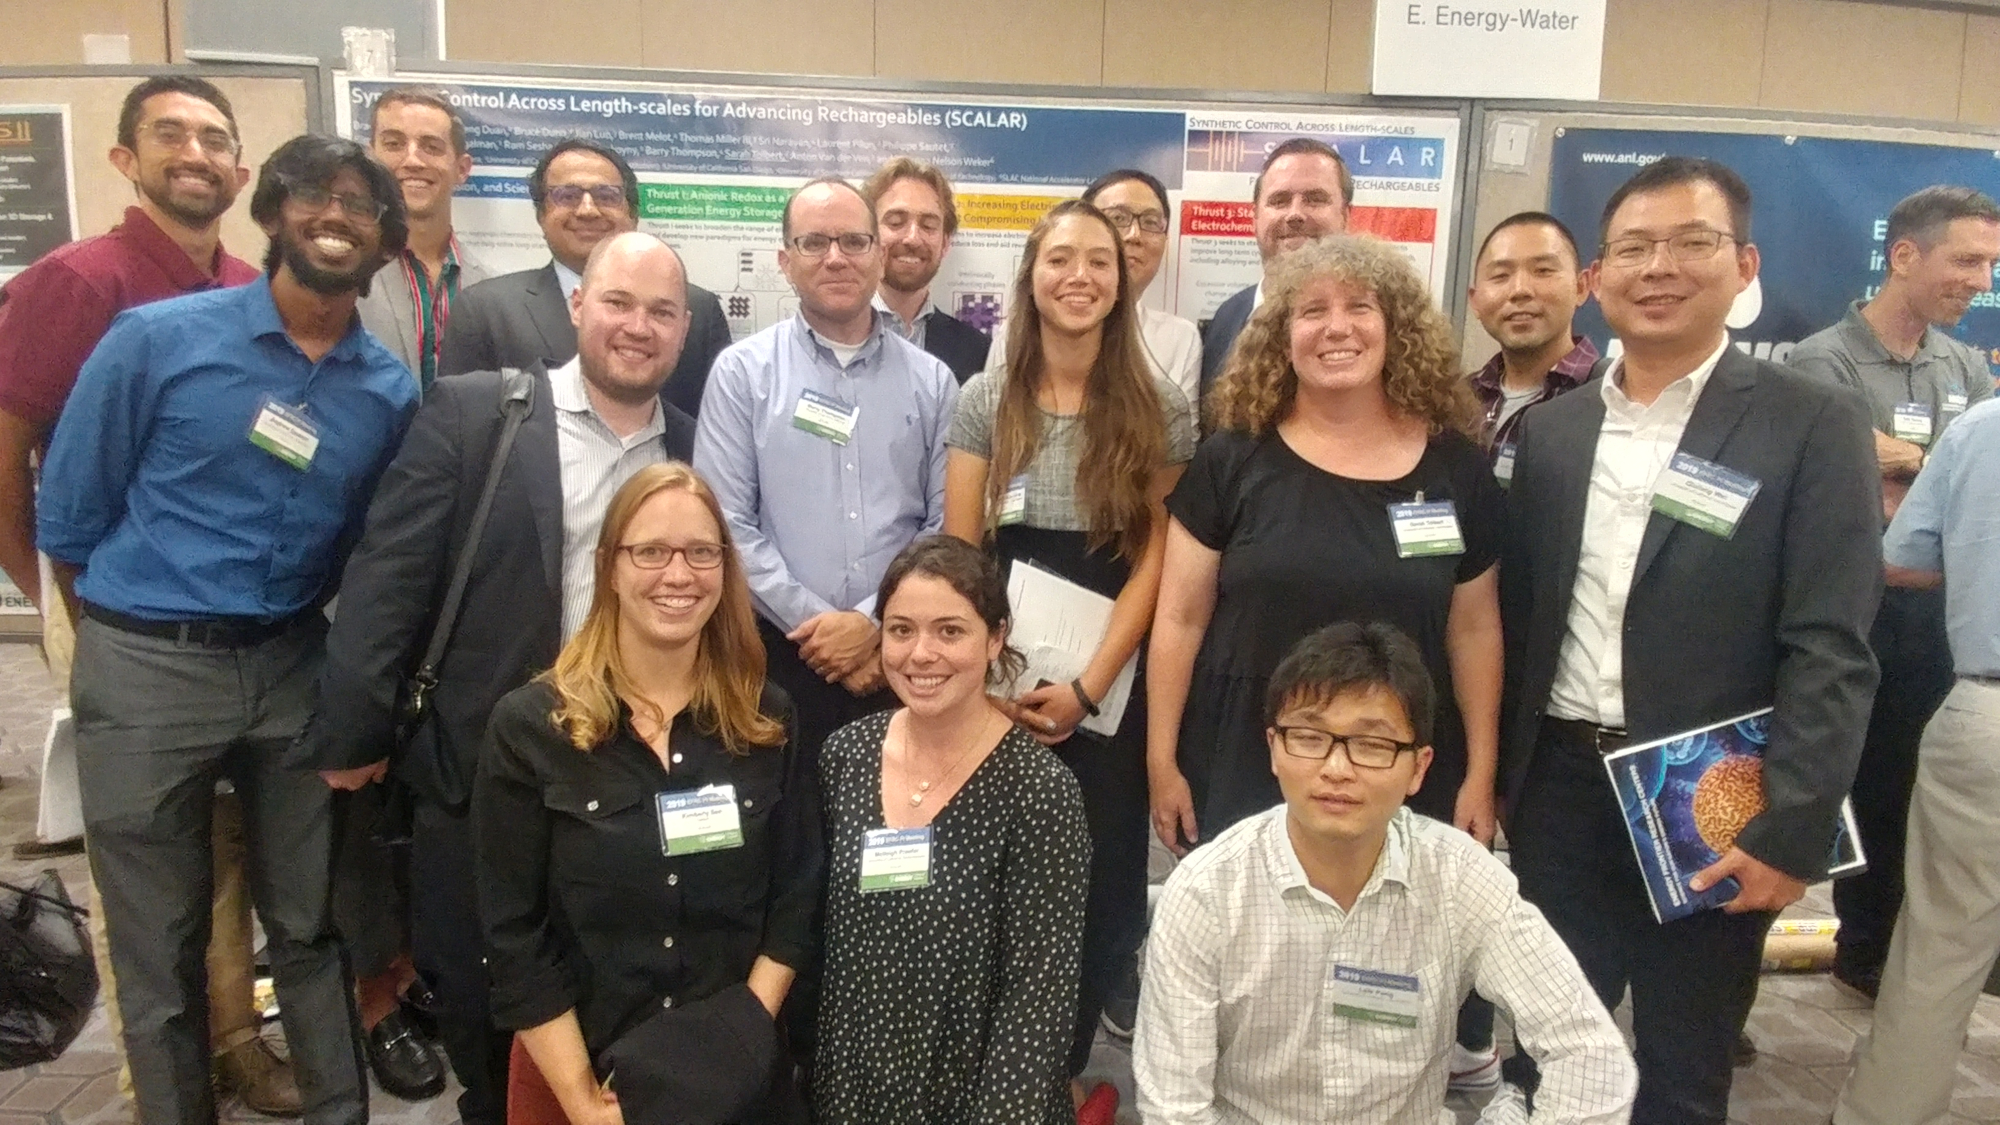 The SCALAR team at the EFRC Meeting in DC, July 2019